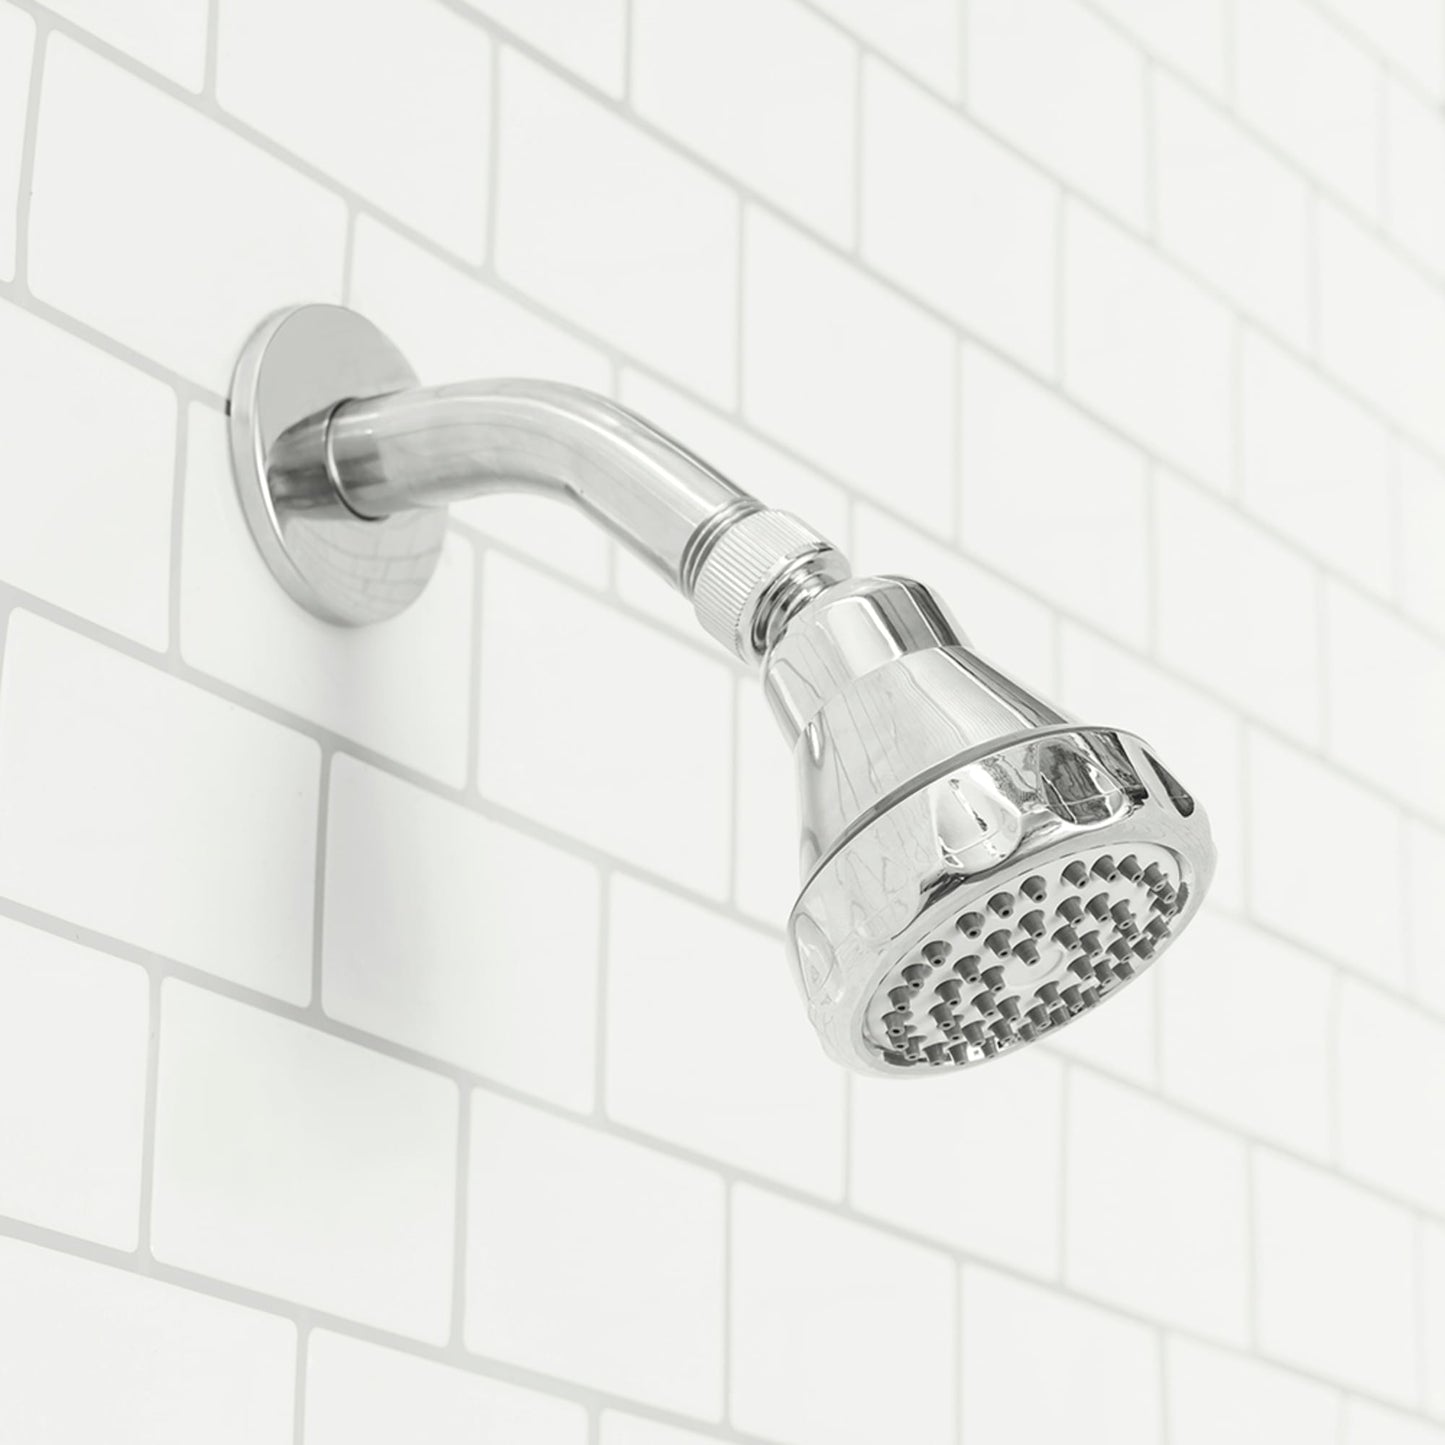 Oasis Single Function Fixed Shower Head, Chrome